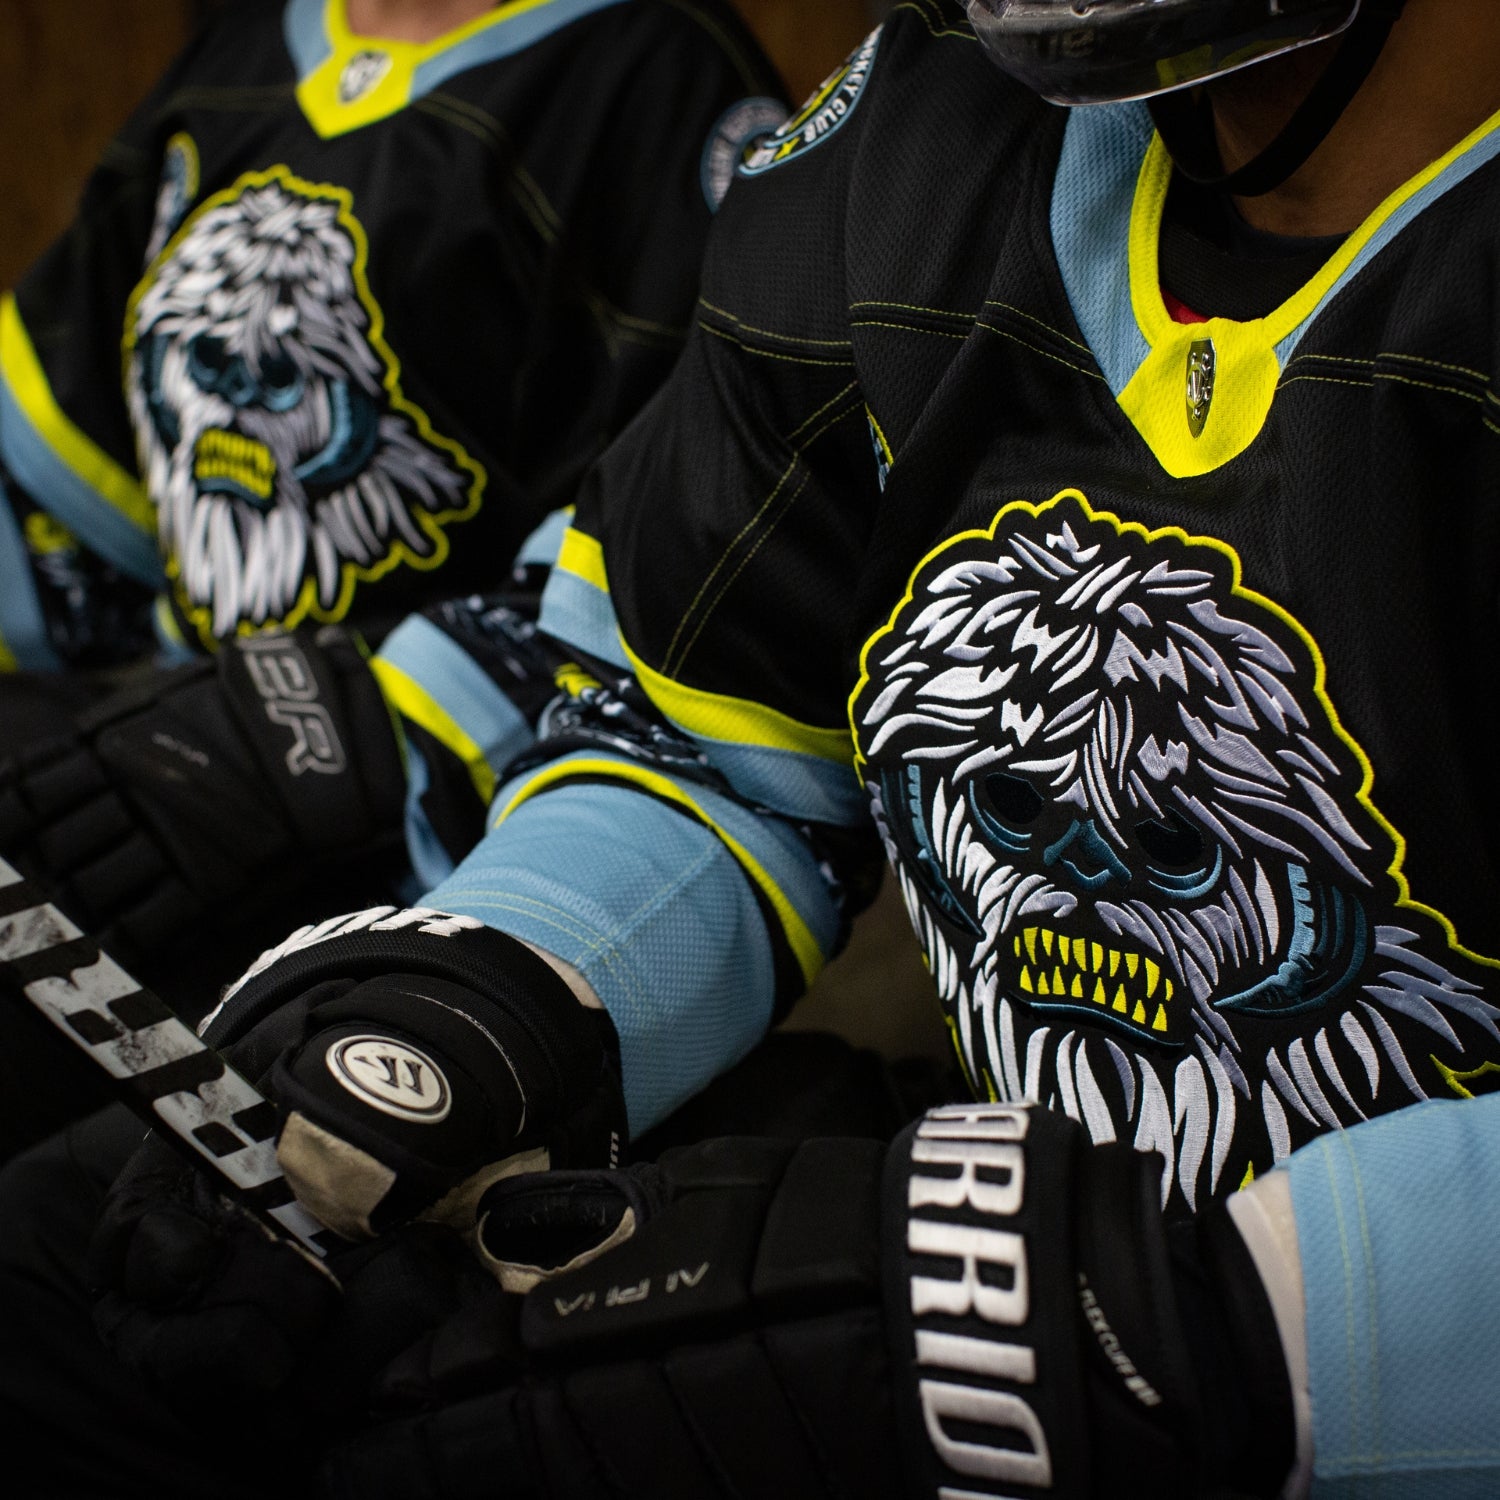 violent gentlemen hockey clothing company hockey club new star wars may the 4th releases - new Hoth hockey jersey, Hoth Star Wars Wampa t-shirt, tee, hoodie, and hockey socks. Learn more by checking out Lifetipsforbetterliving Hockey Apparel